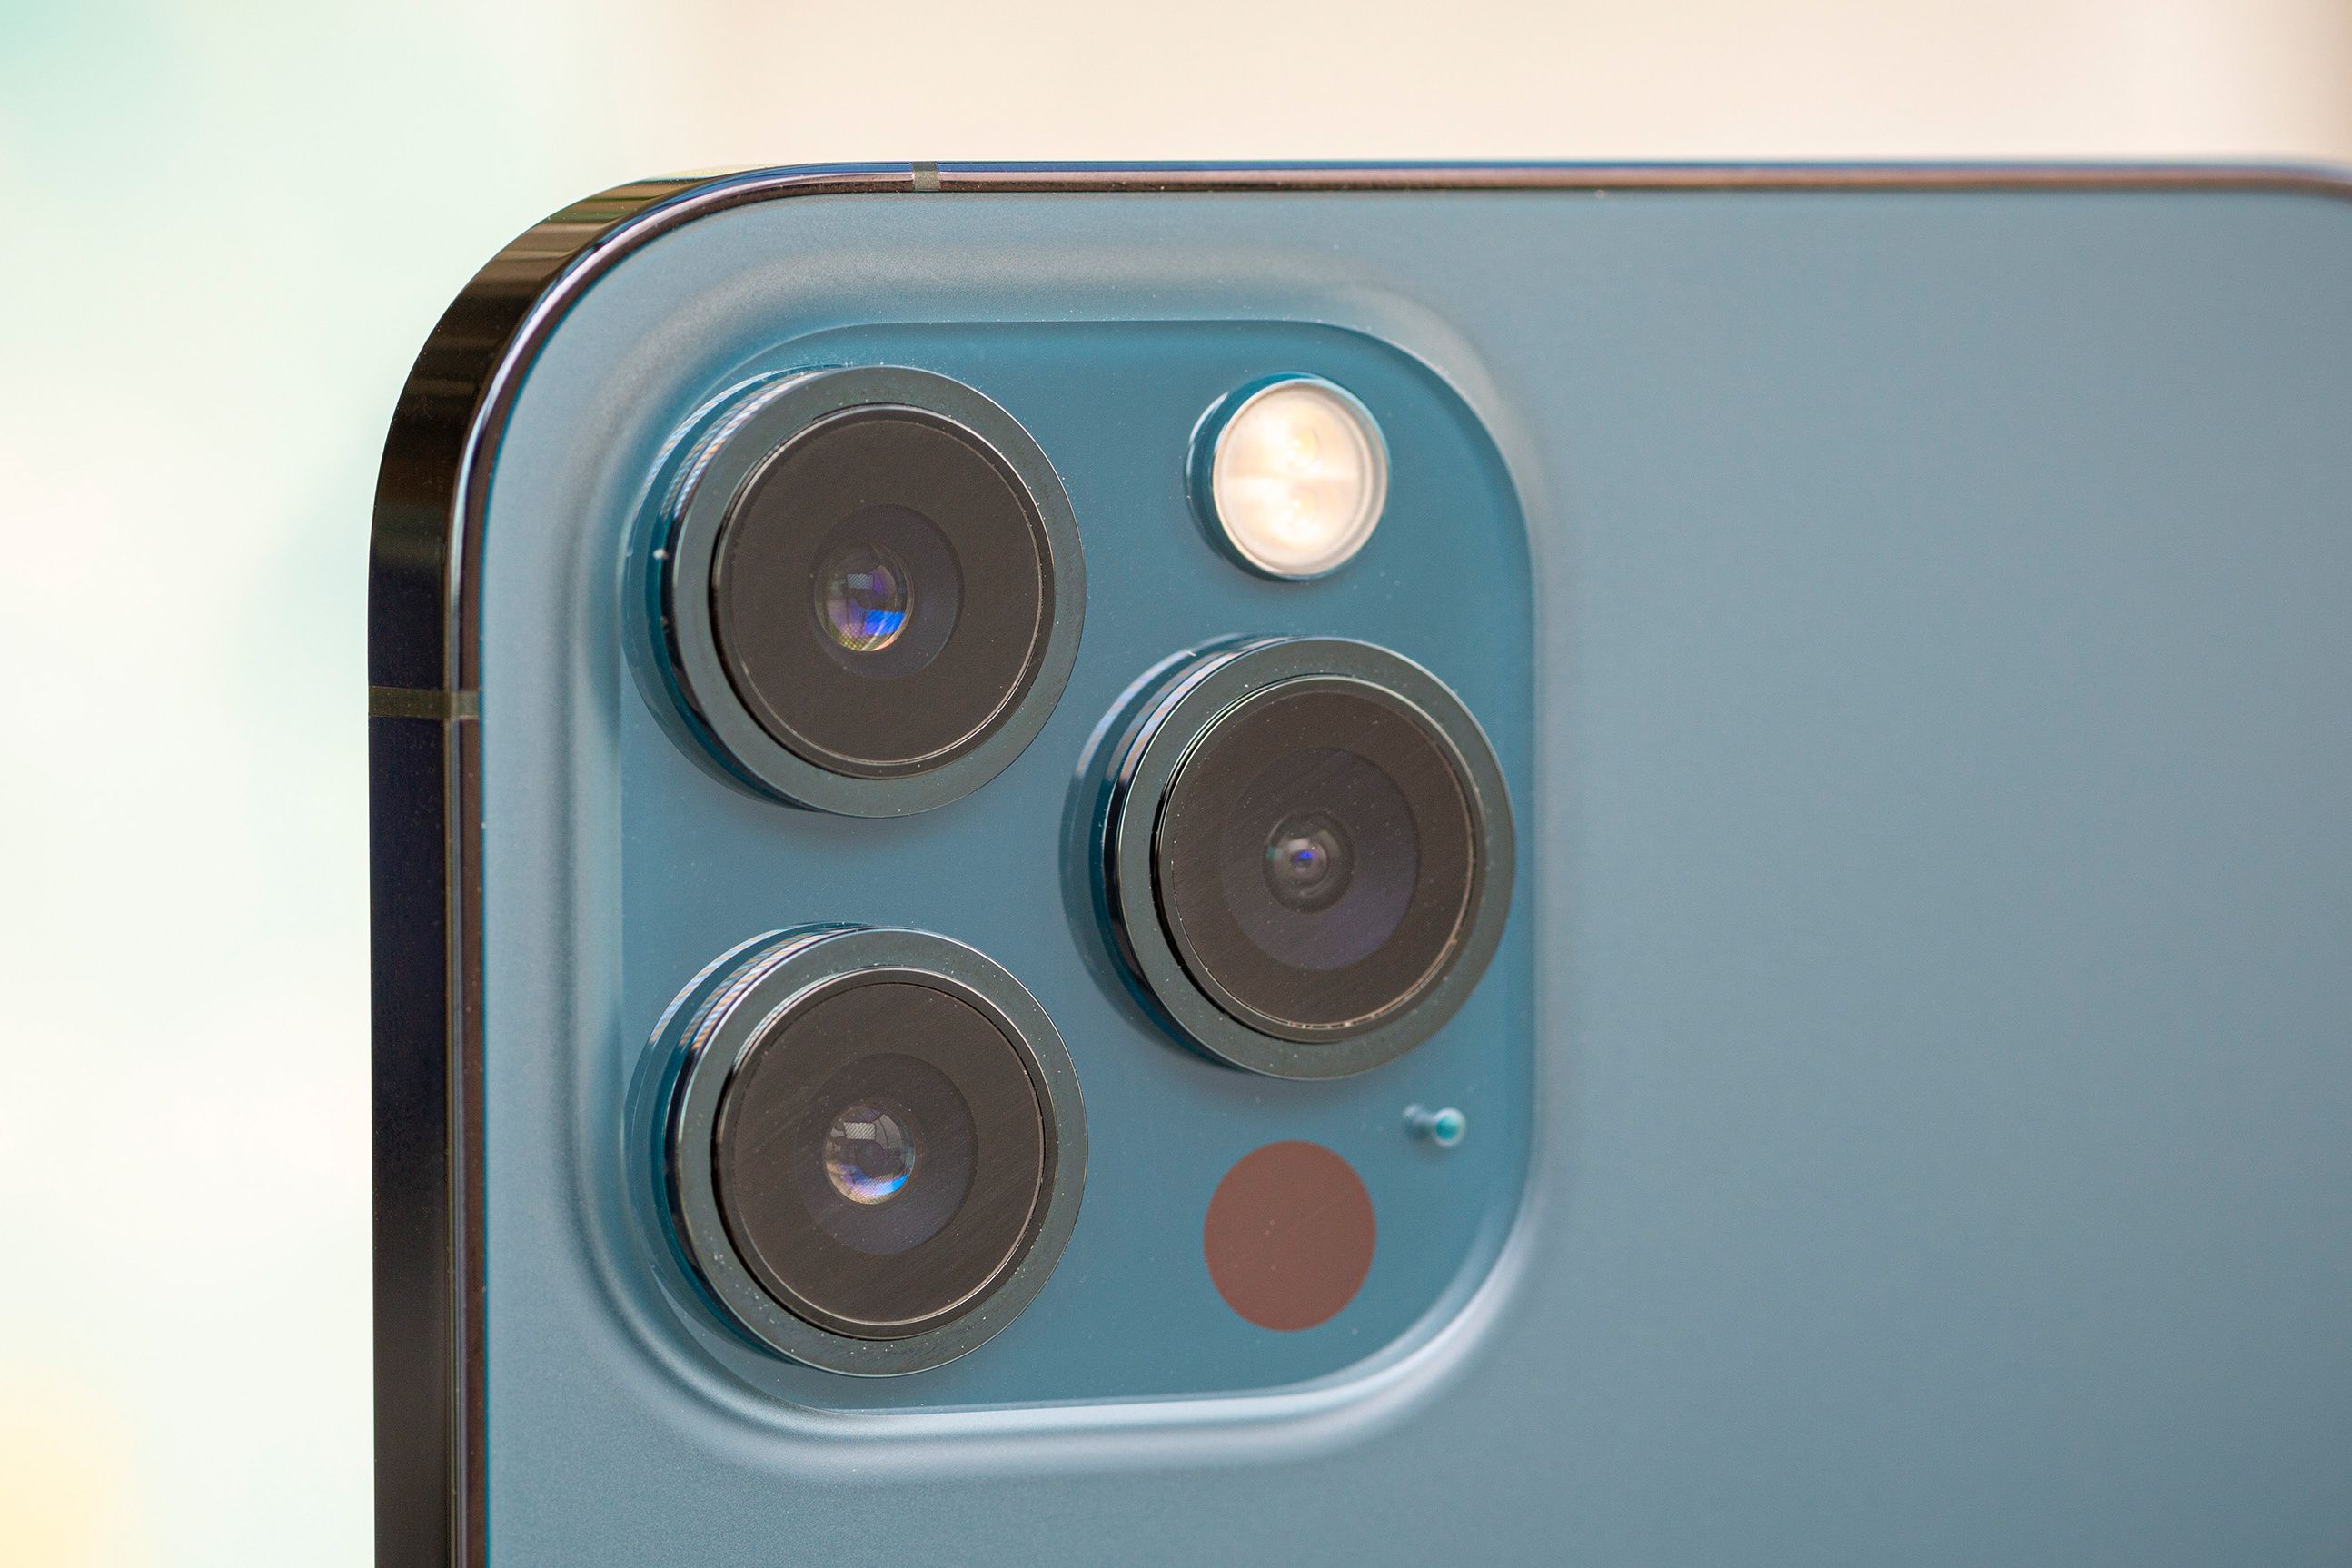 Kuo: iPhone 13 Pro series to have improved ultra-wide camera with AF